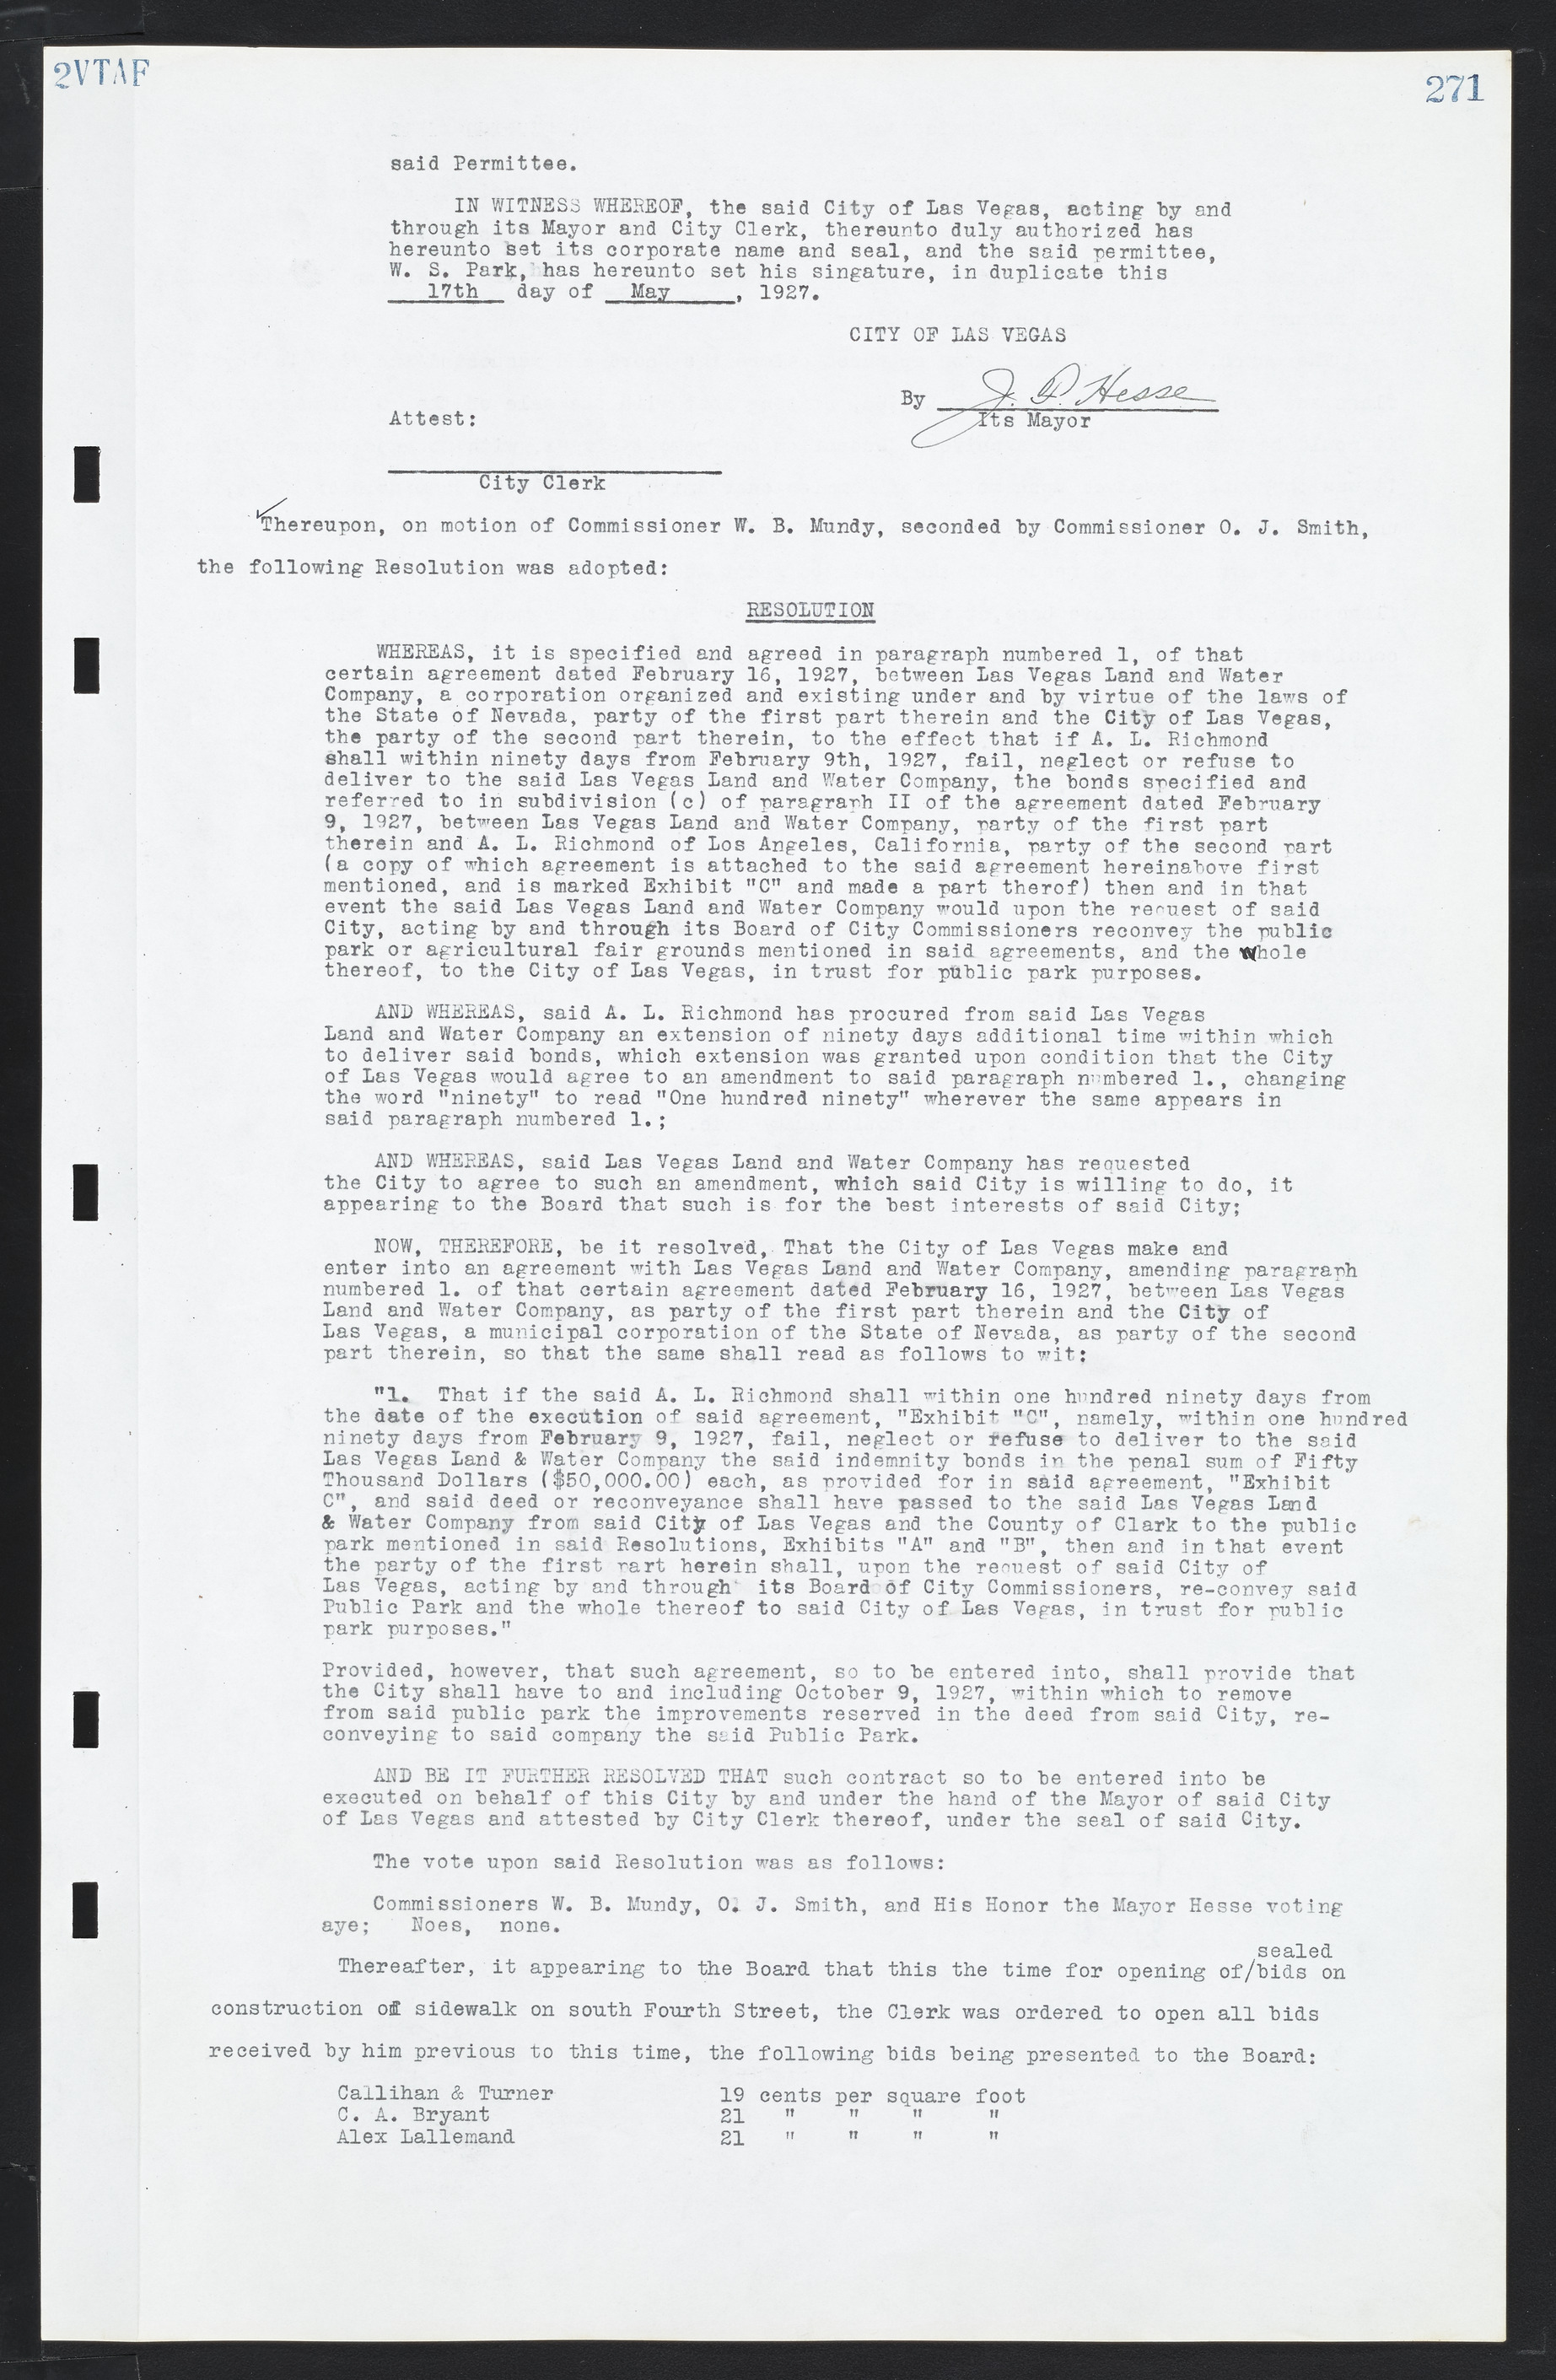 Las Vegas City Commission Minutes, March 1, 1922 to May 10, 1929, lvc000002-280